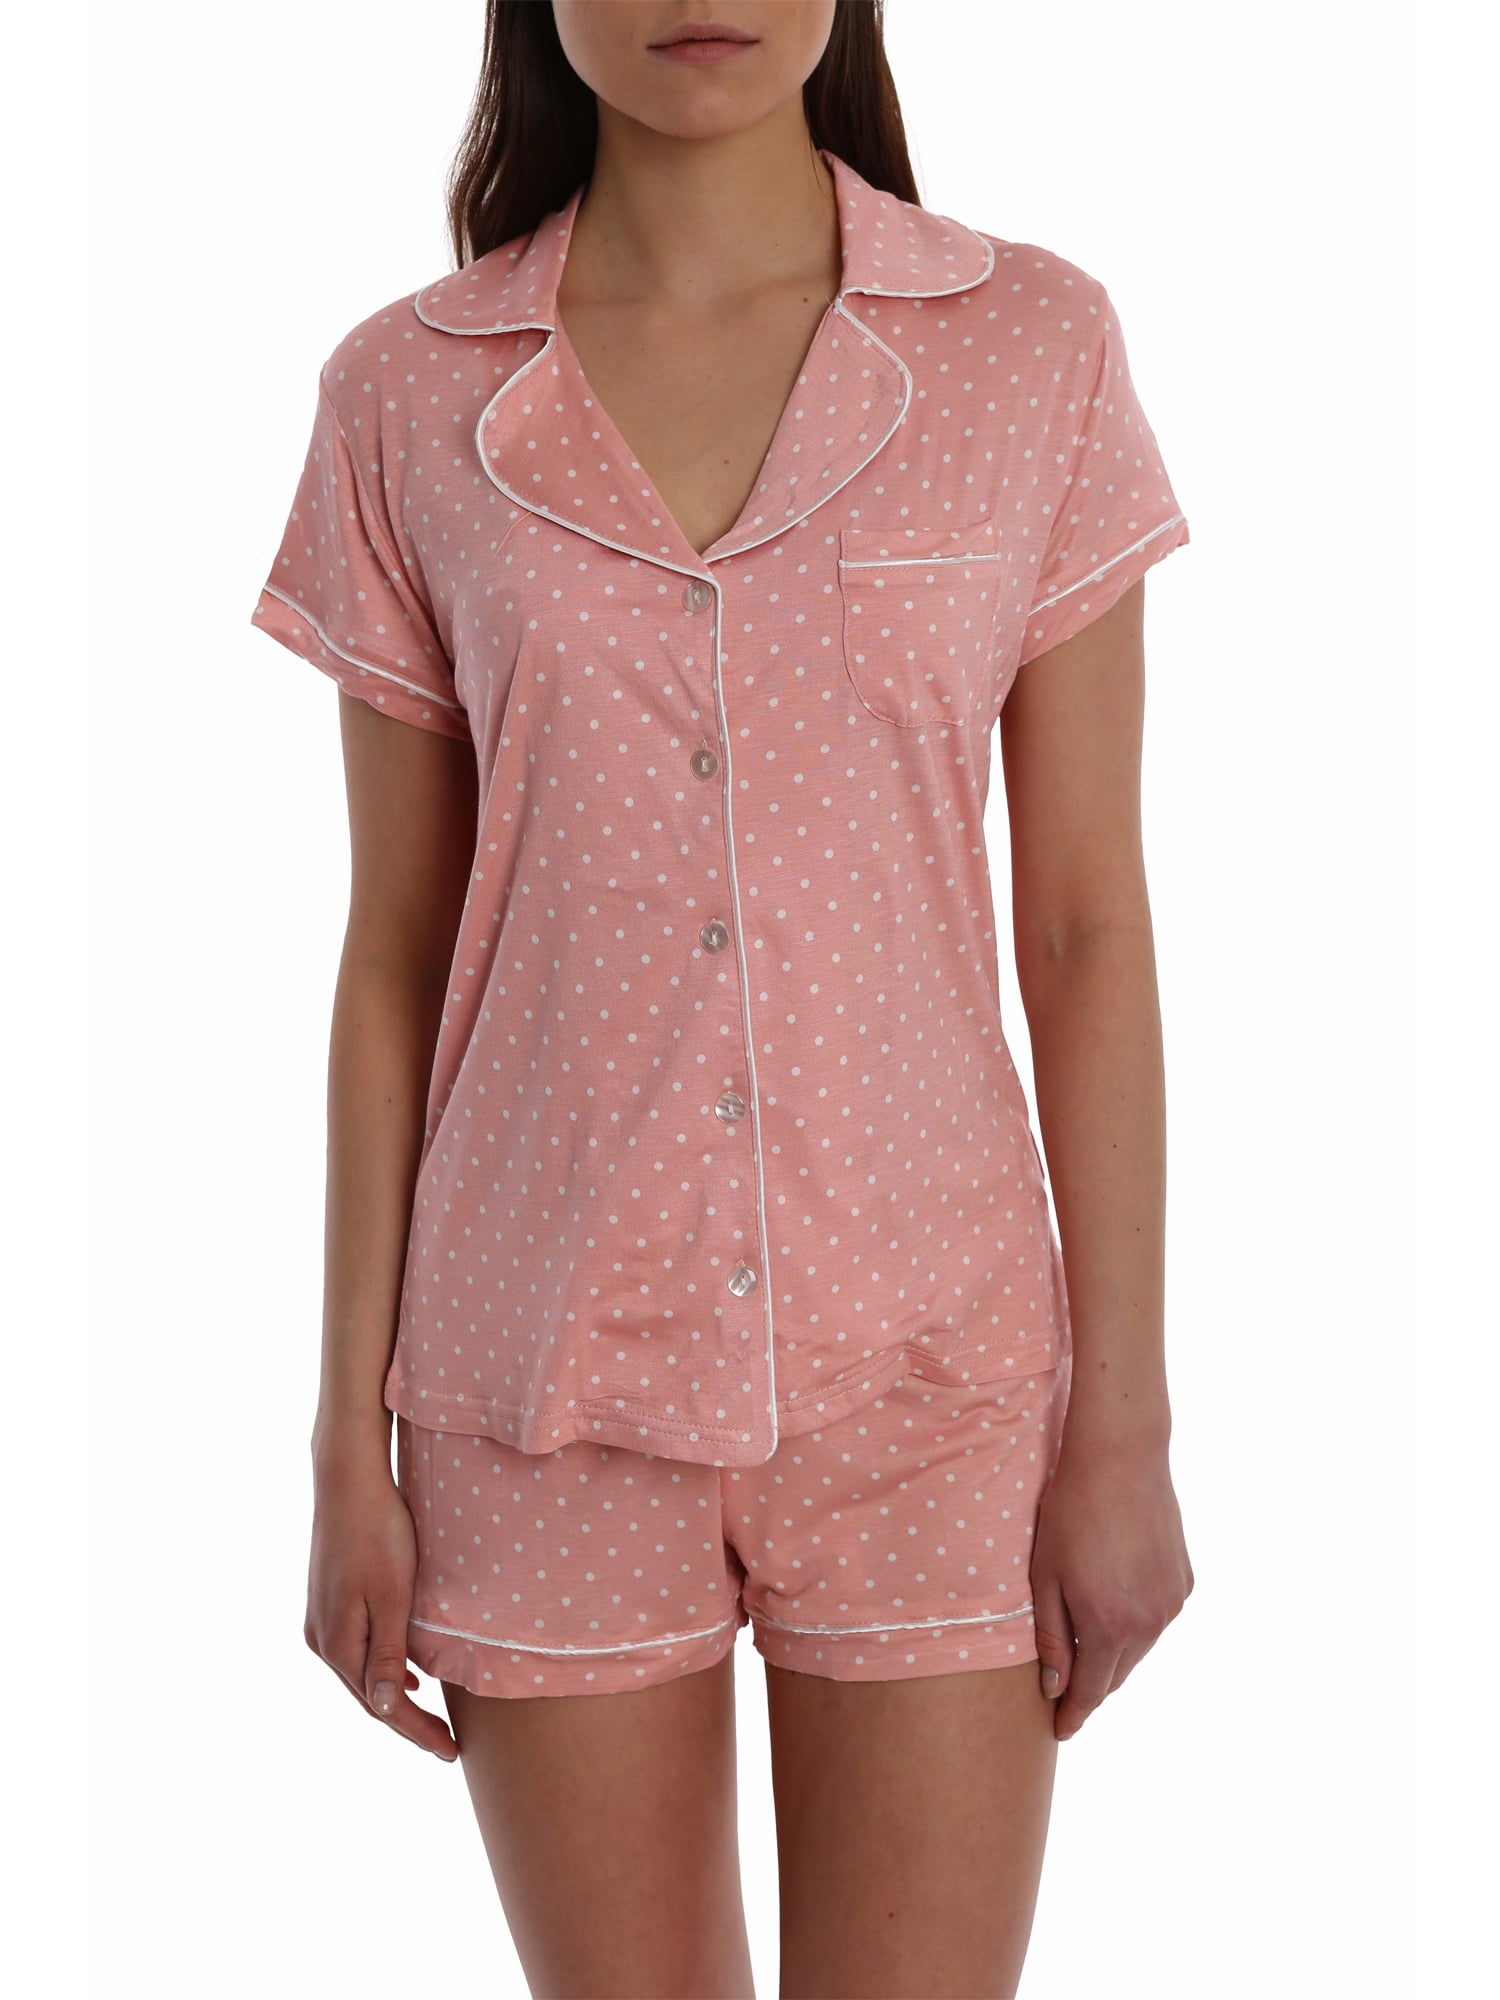 COLORFULLEAF Women’s Pajama Set Button Down Short Sleeve PJS Top and Sleep Shorts